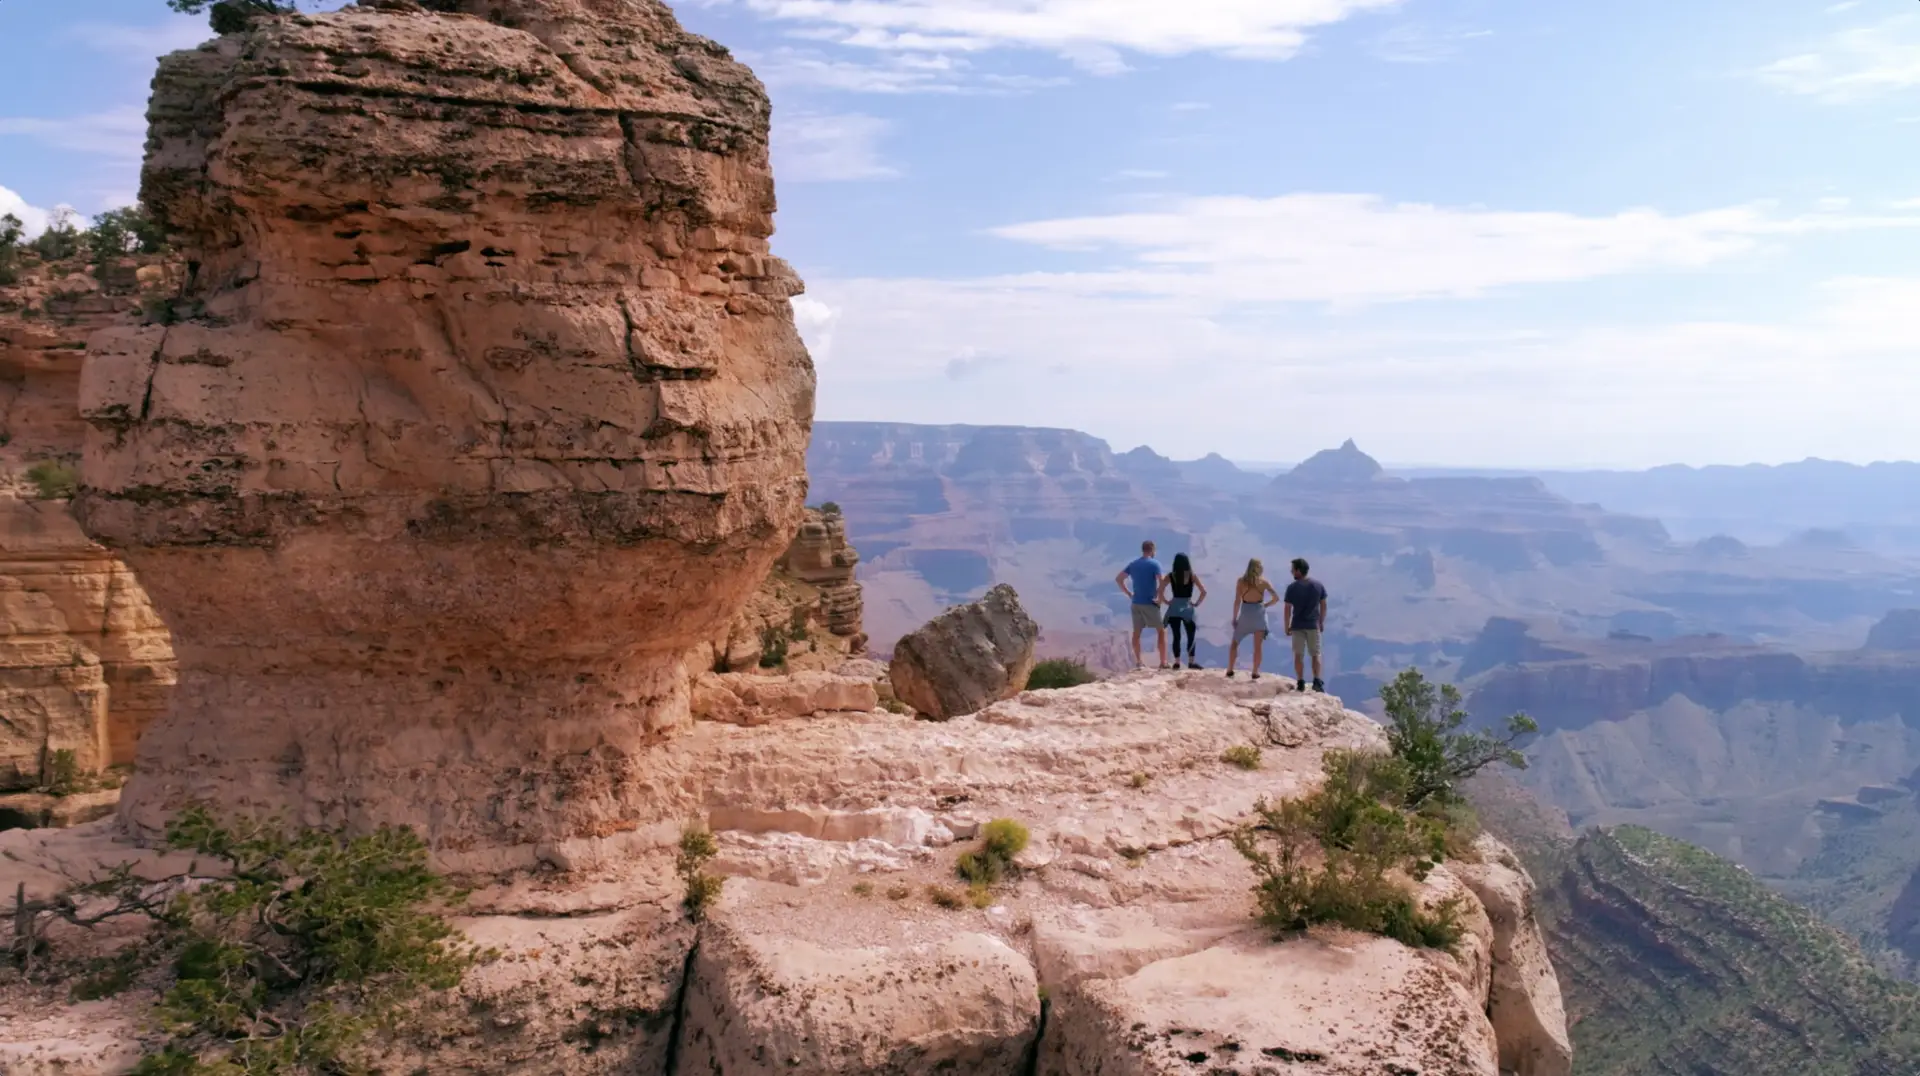 A group of people are standing on the edge of a cliff, overlooking the grand canyon during their AAA trip.